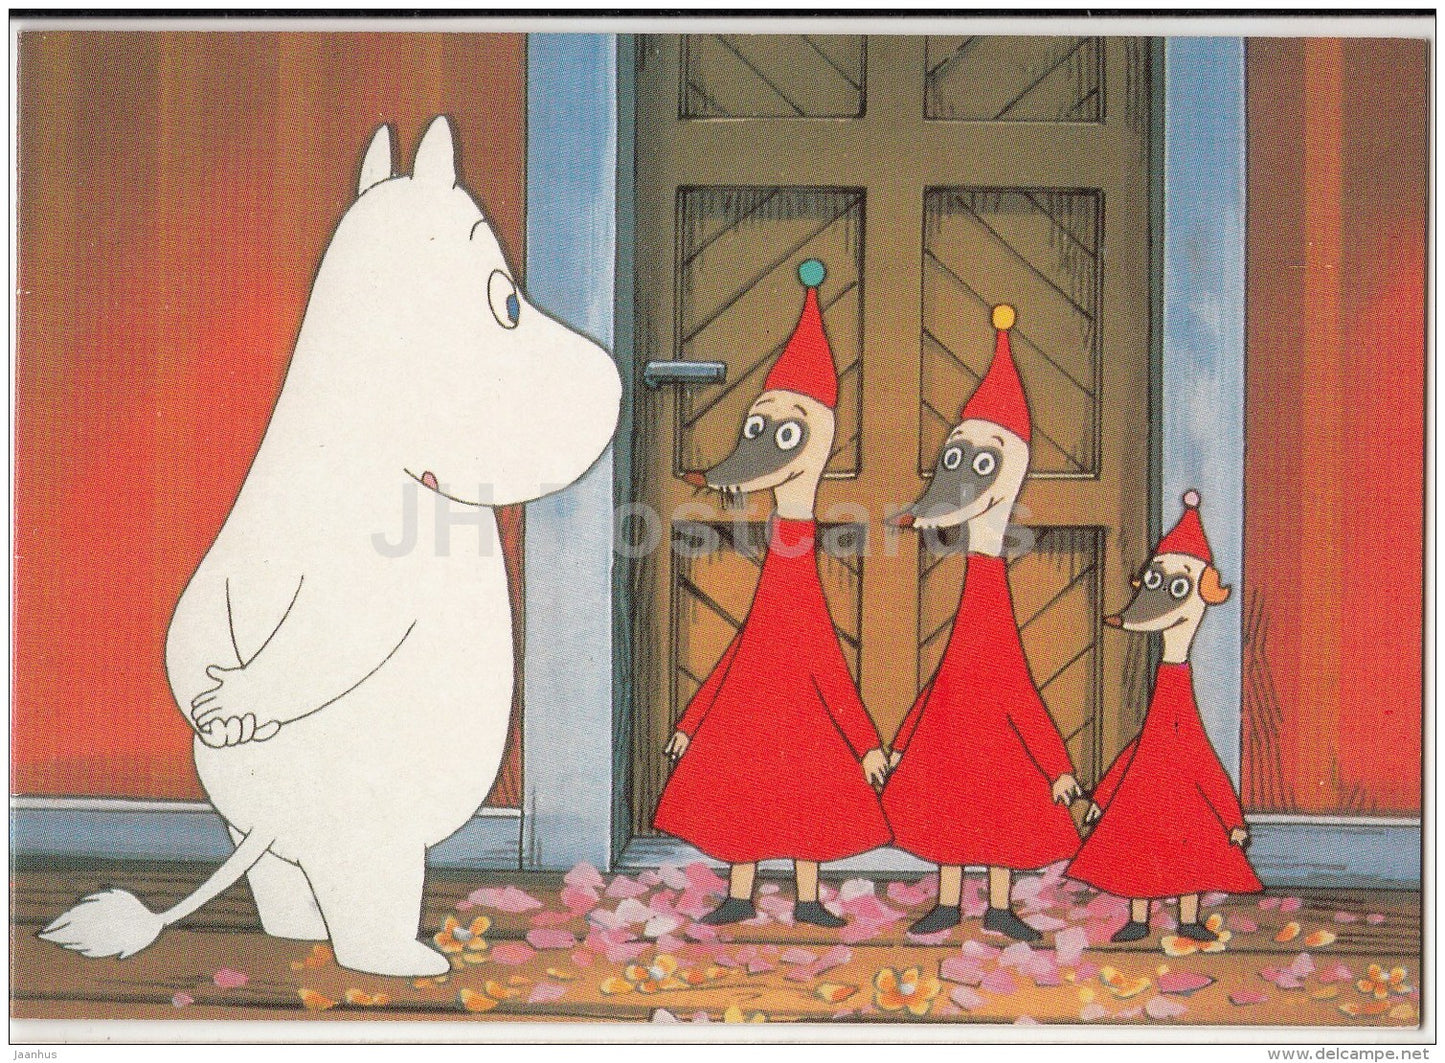 Moomin - Tales from Moominvalley - illustration - Finland - used - JH Postcards